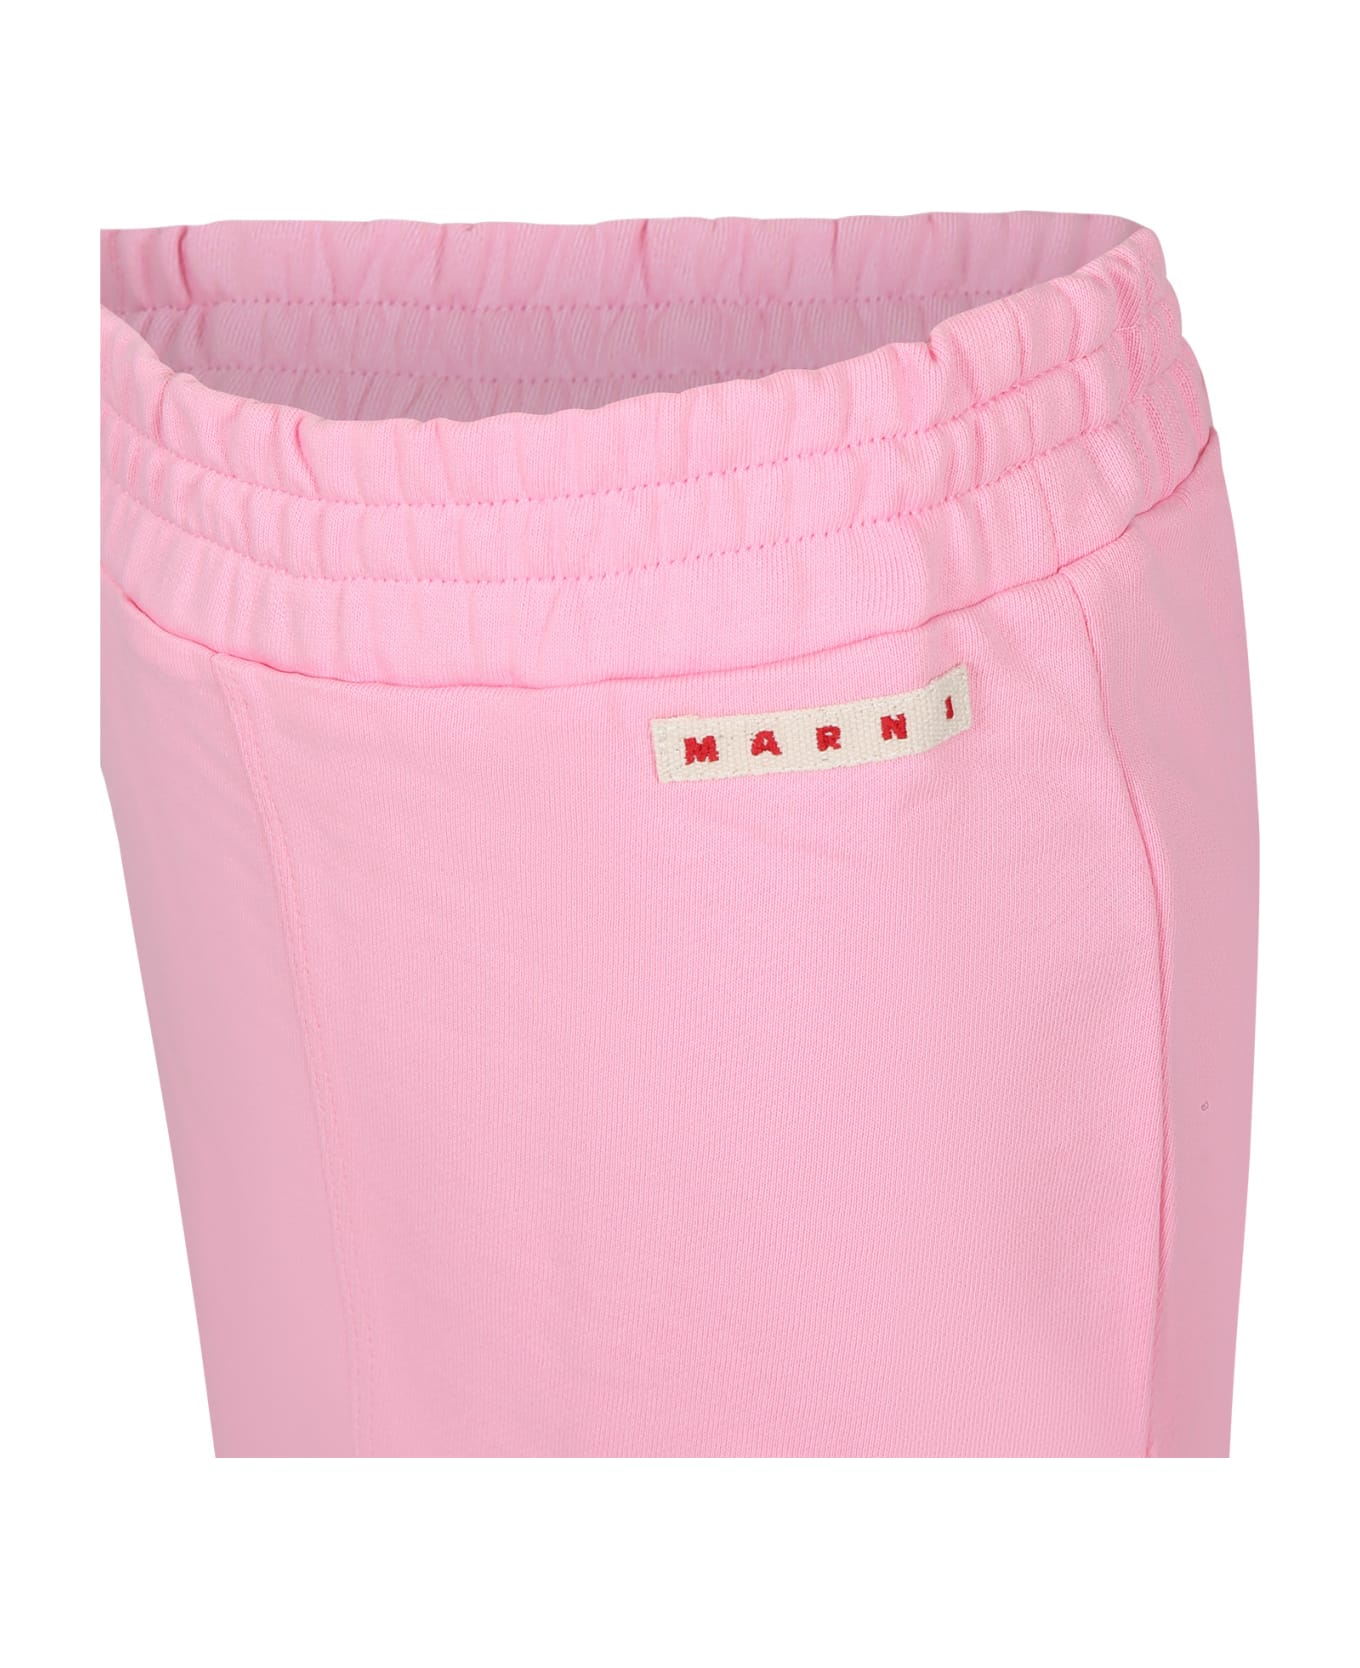 Marni Pink Skirt For Girl With Logo - Pink ボトムス